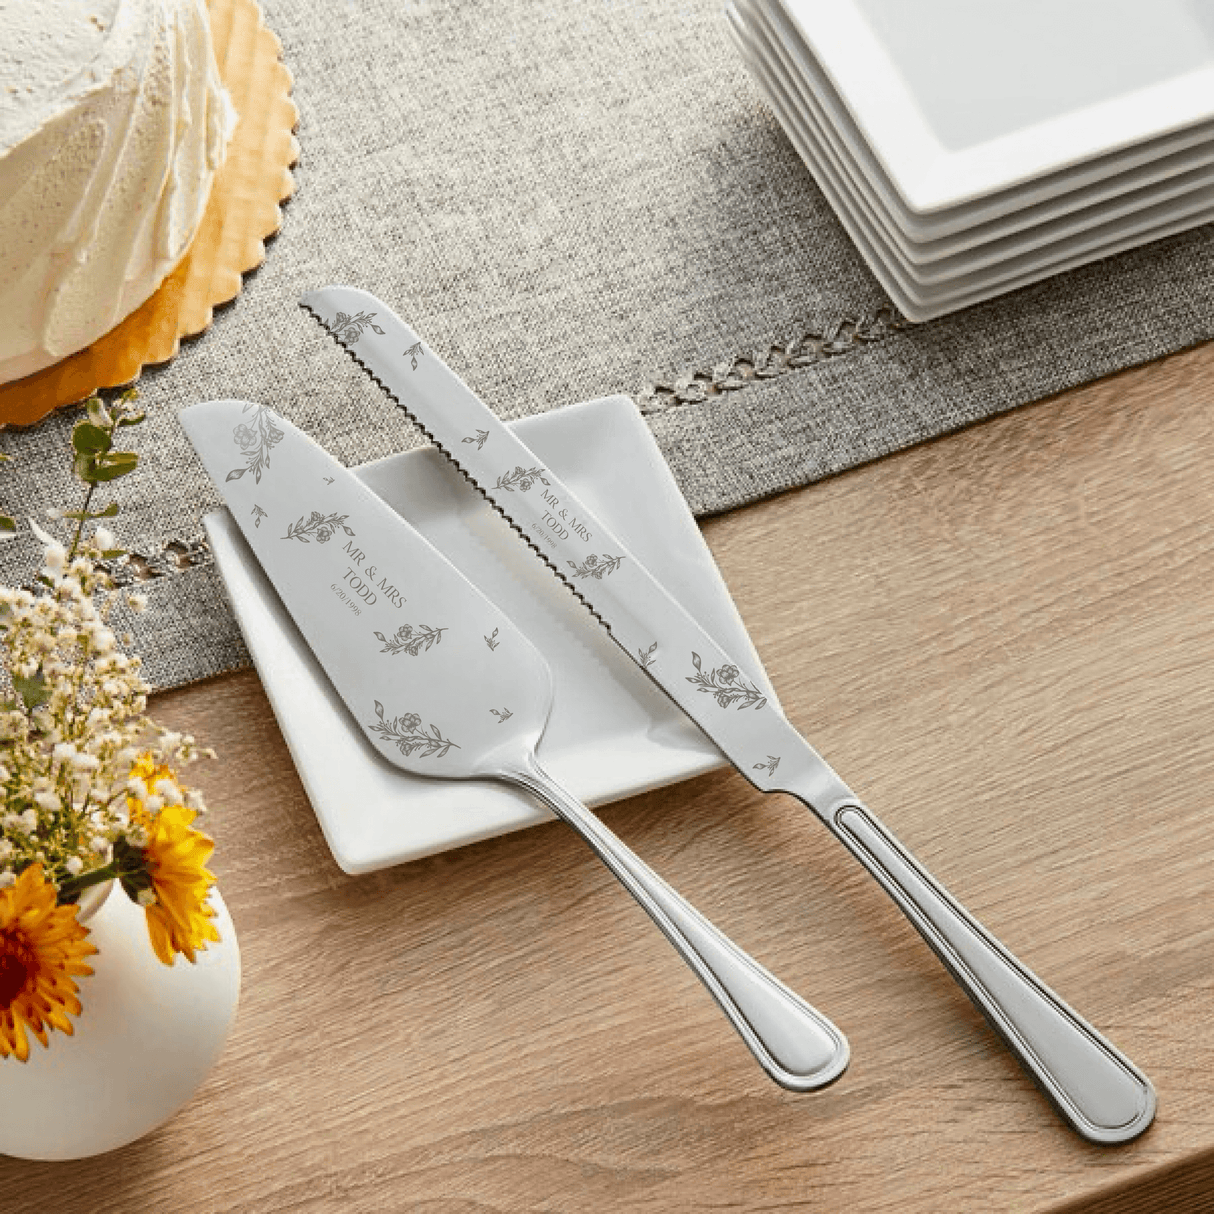 Personalized Cake Serving Set - 2-Piece Stainless Steel